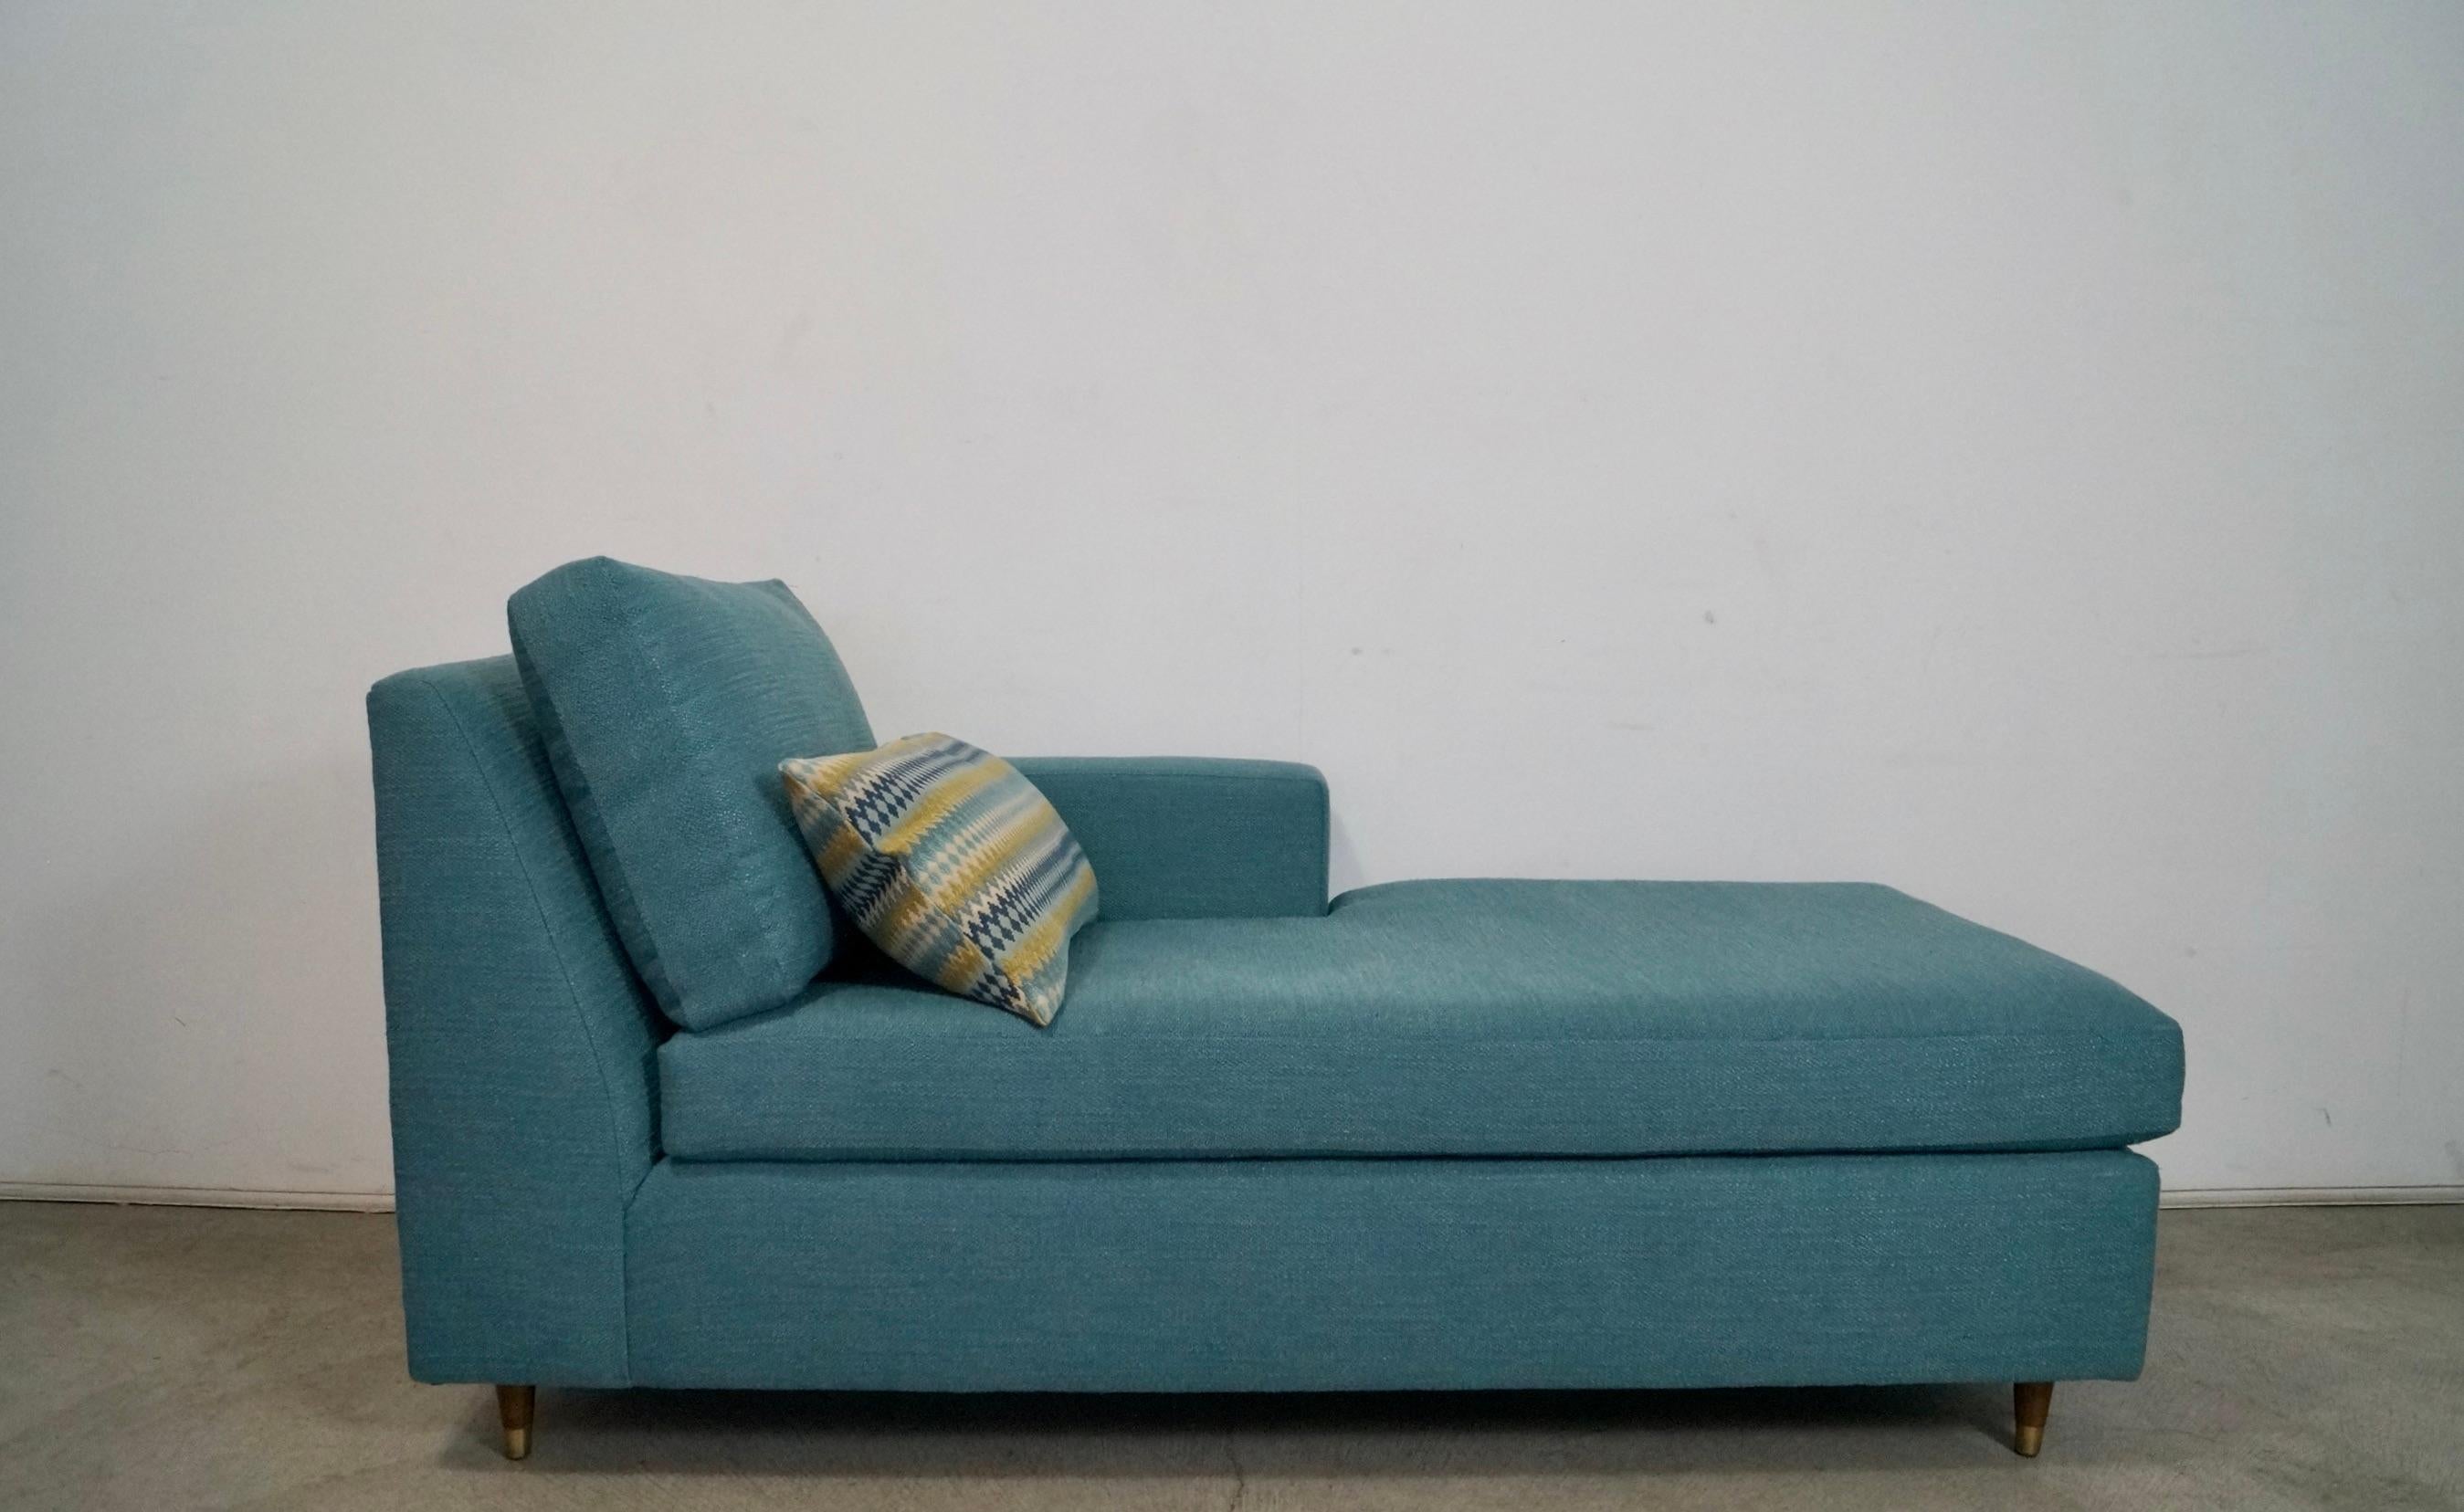 American 1970's Mid-Century Modern Single Arm Reupholstered Chaise Lounge Daybed For Sale